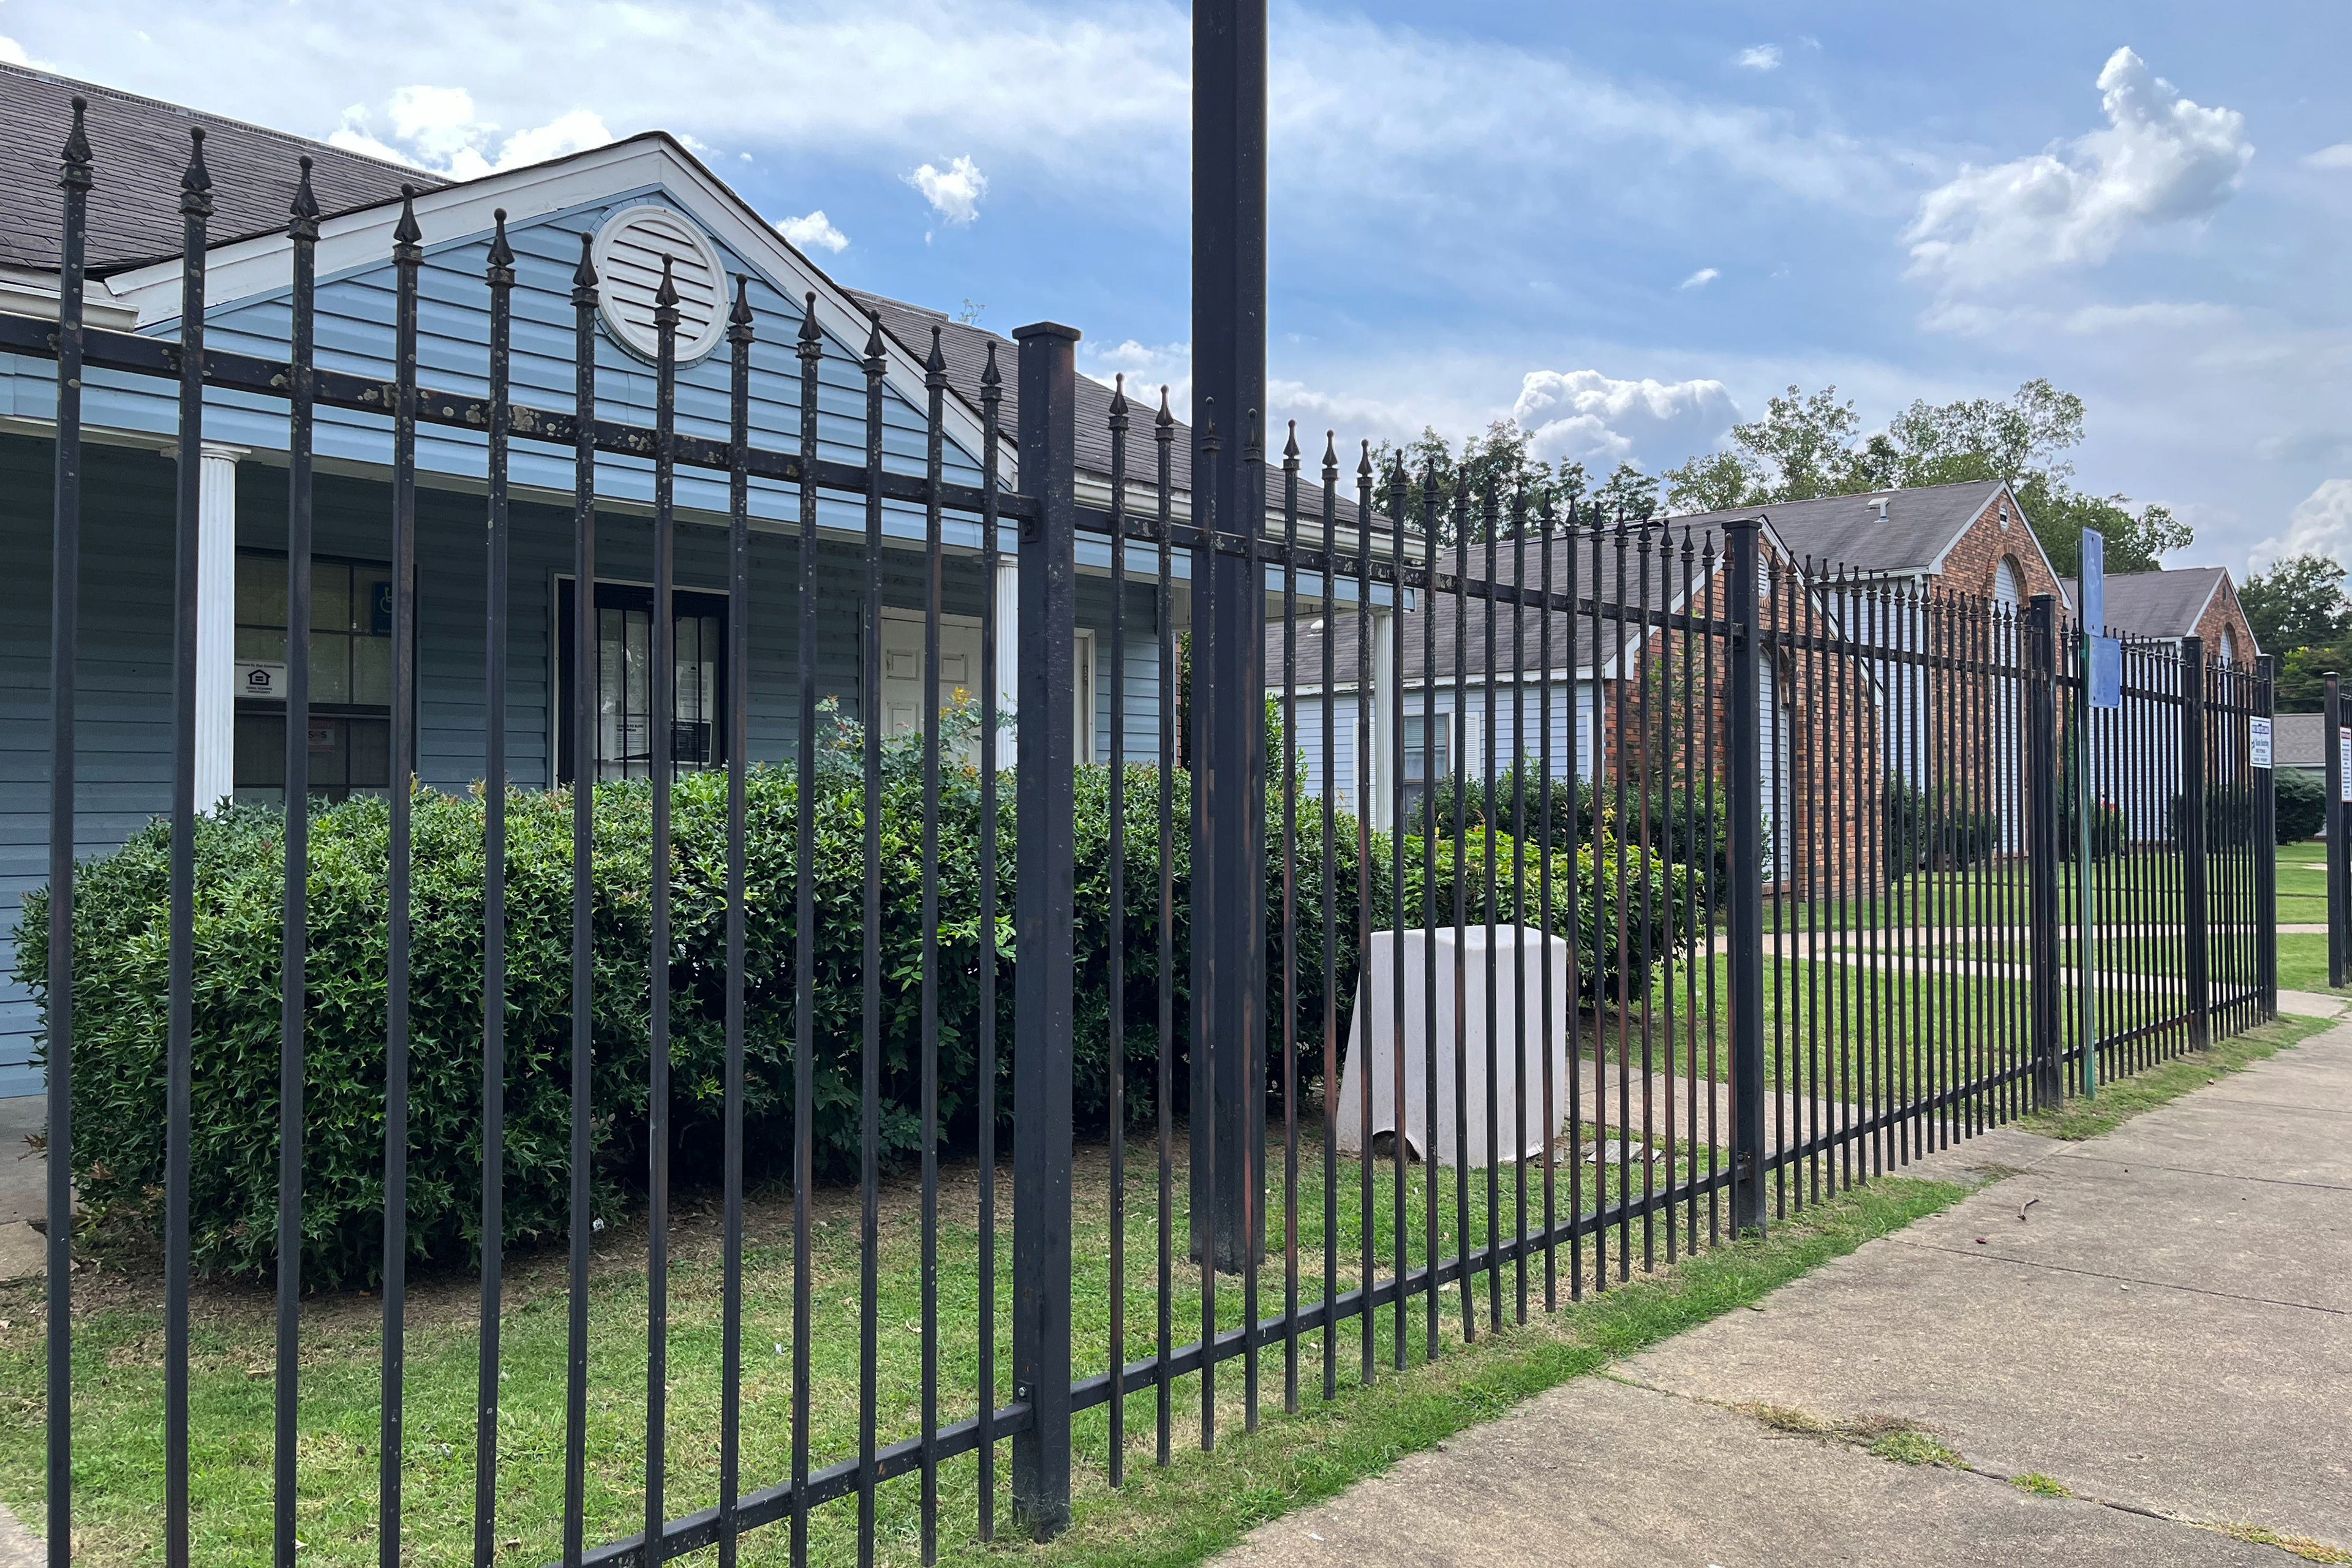 A photo of a housing complex seen behind a fence.